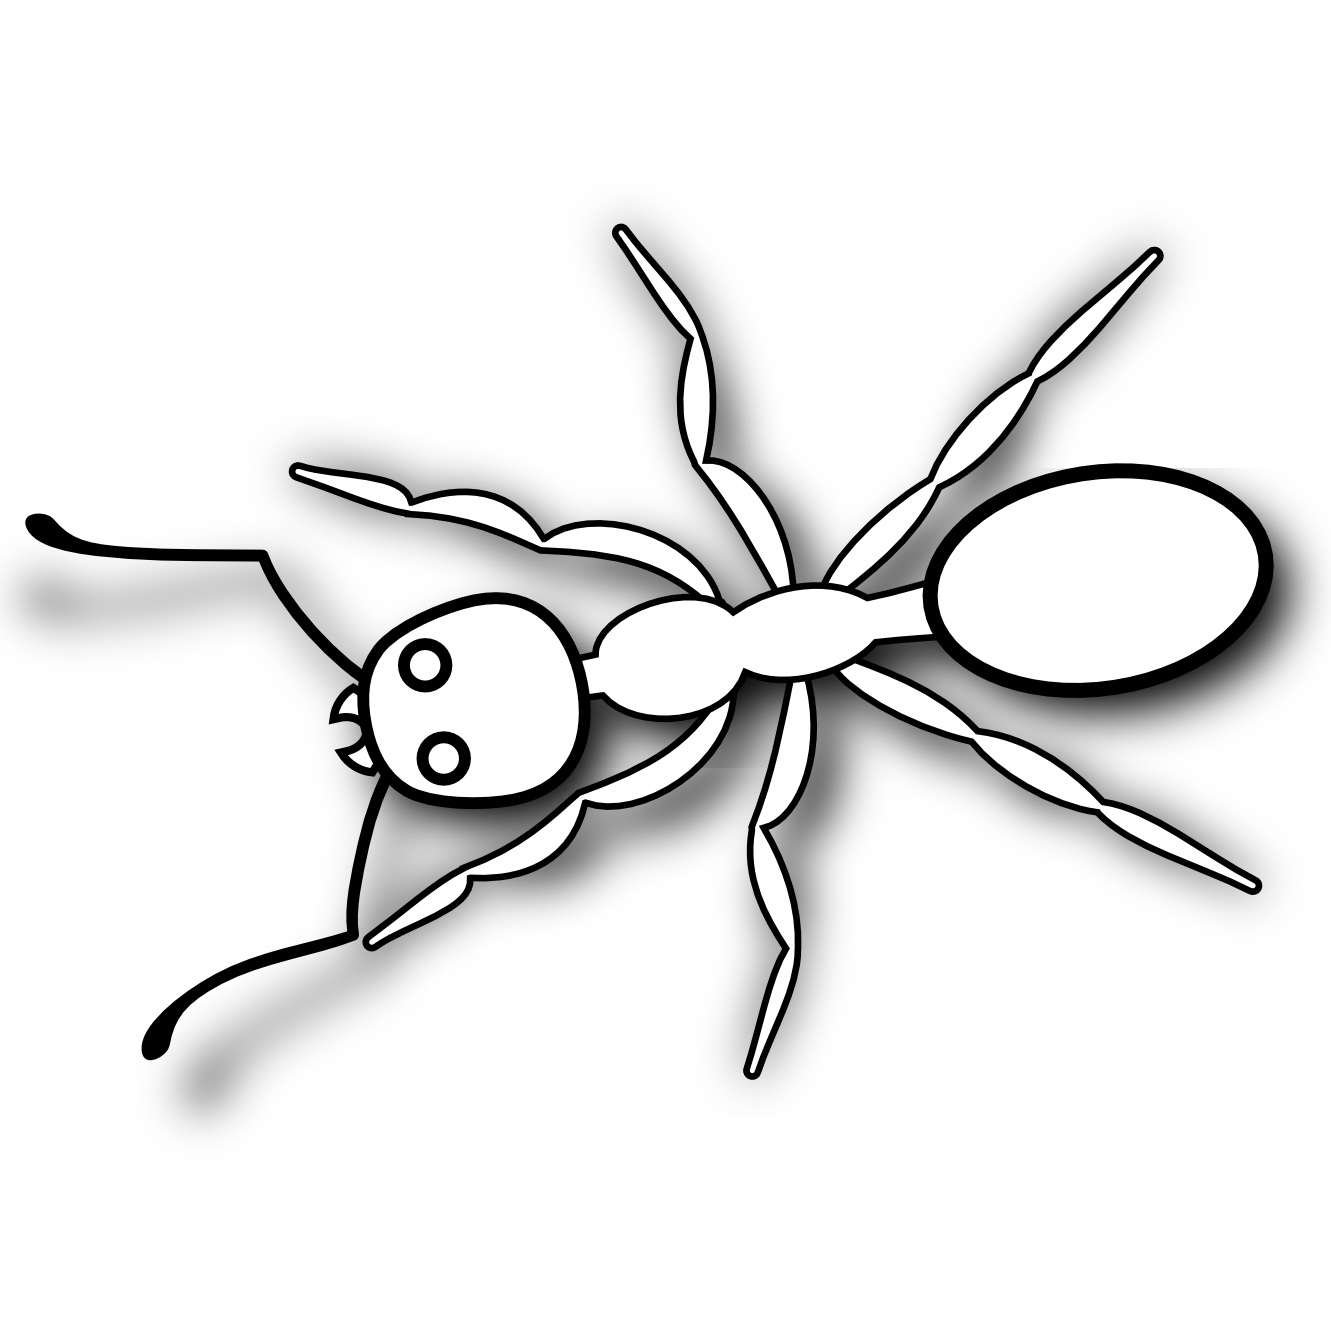 Free pictures of for. Ants clipart sketch